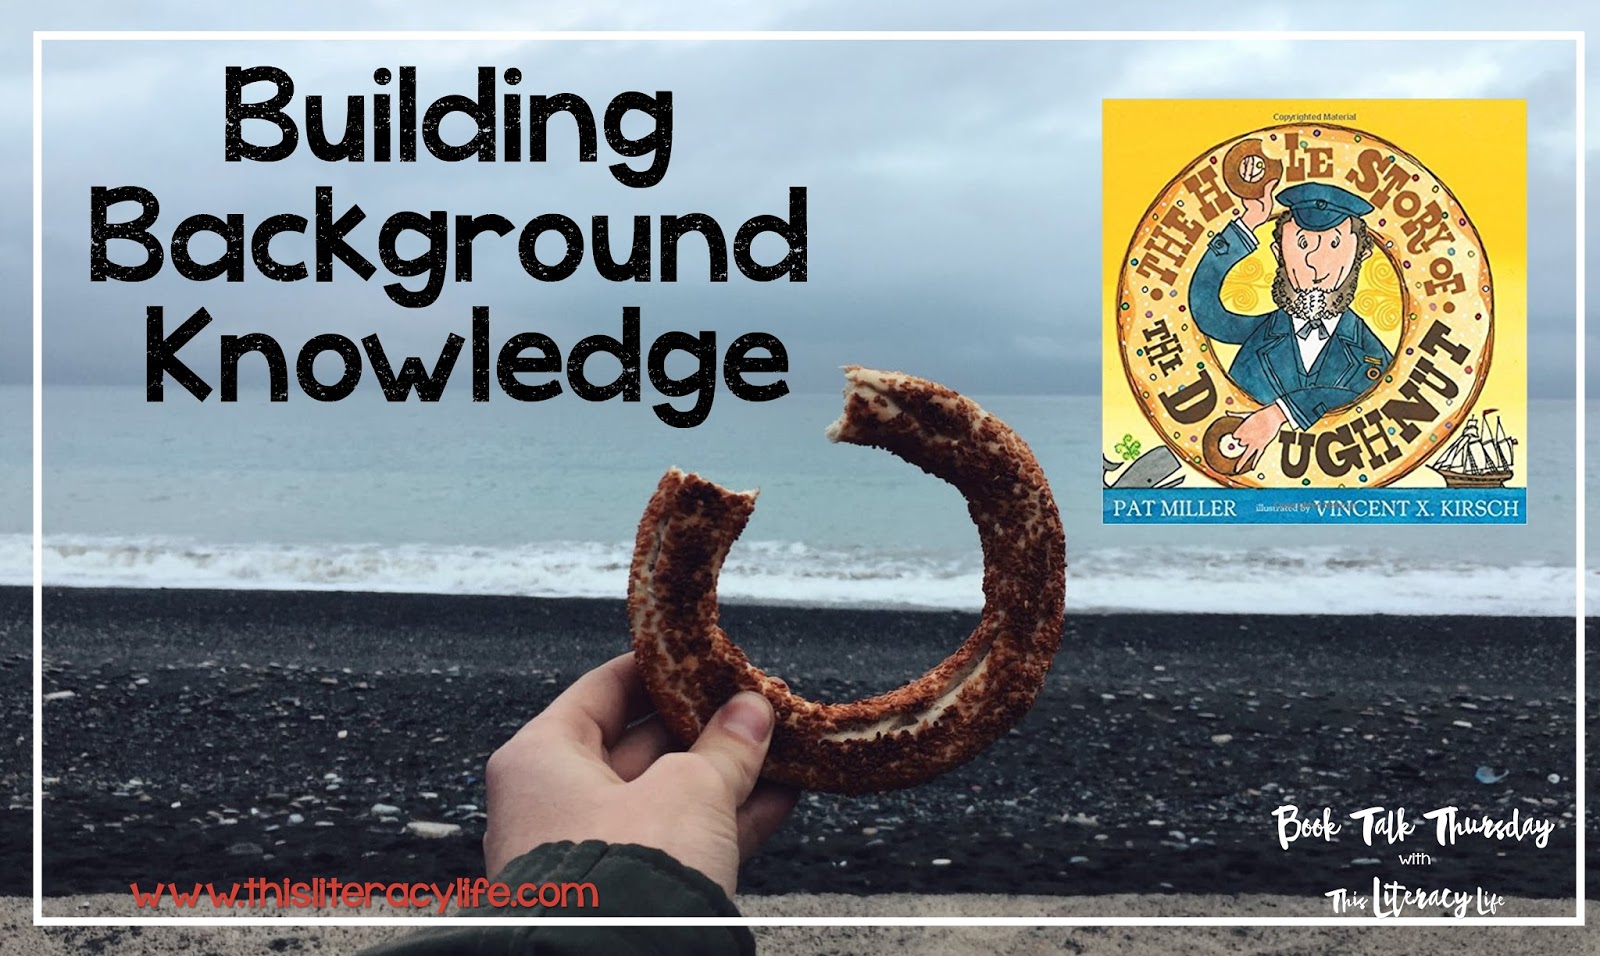 Doughnuts are a favorite with so many of us. The Hole Story of the Doughnut is a great book to help us all gain background knowledge.